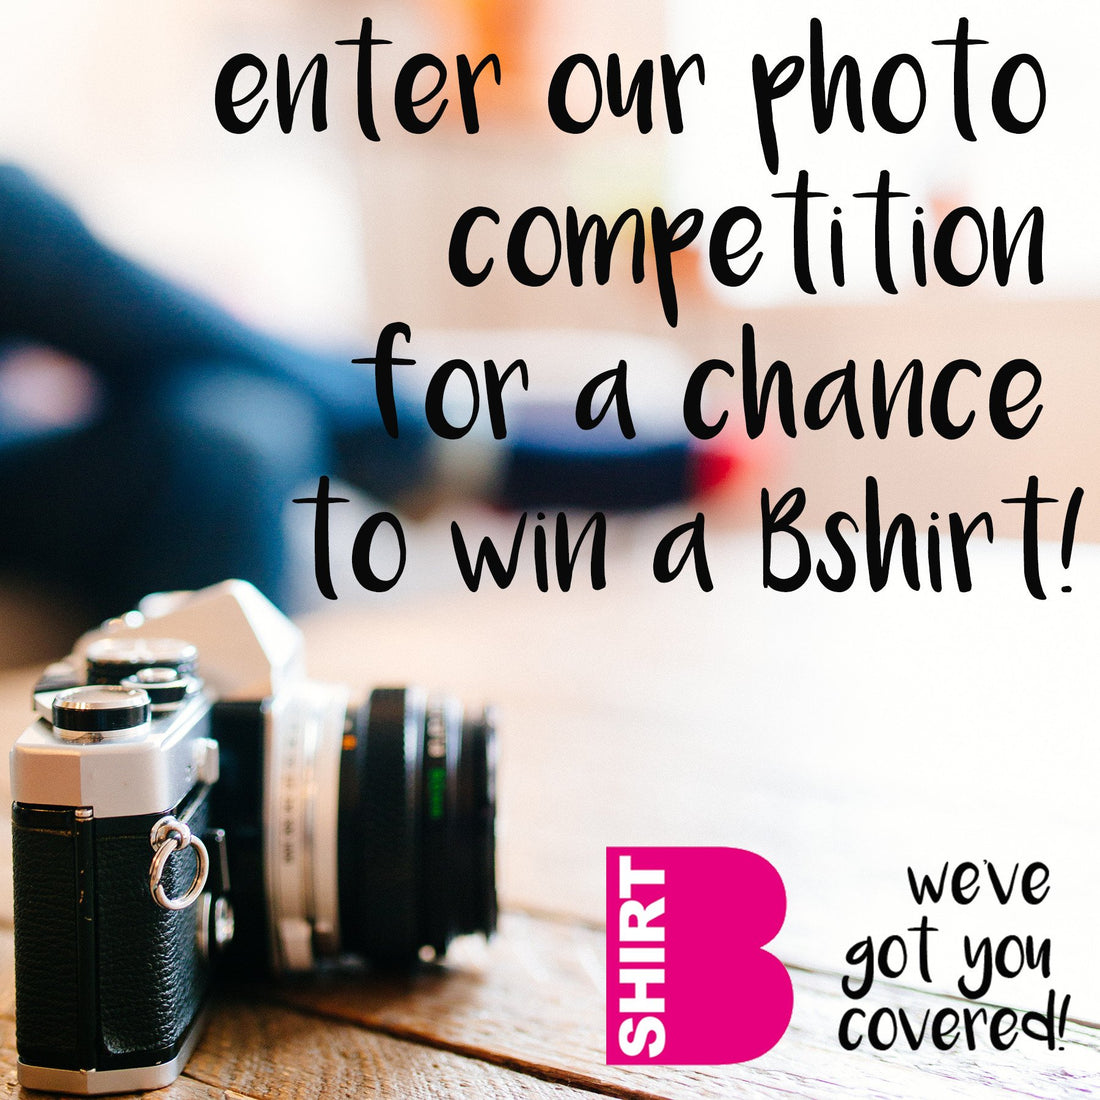 Still time to enter the photo competition for a chance to win a Bshirt!